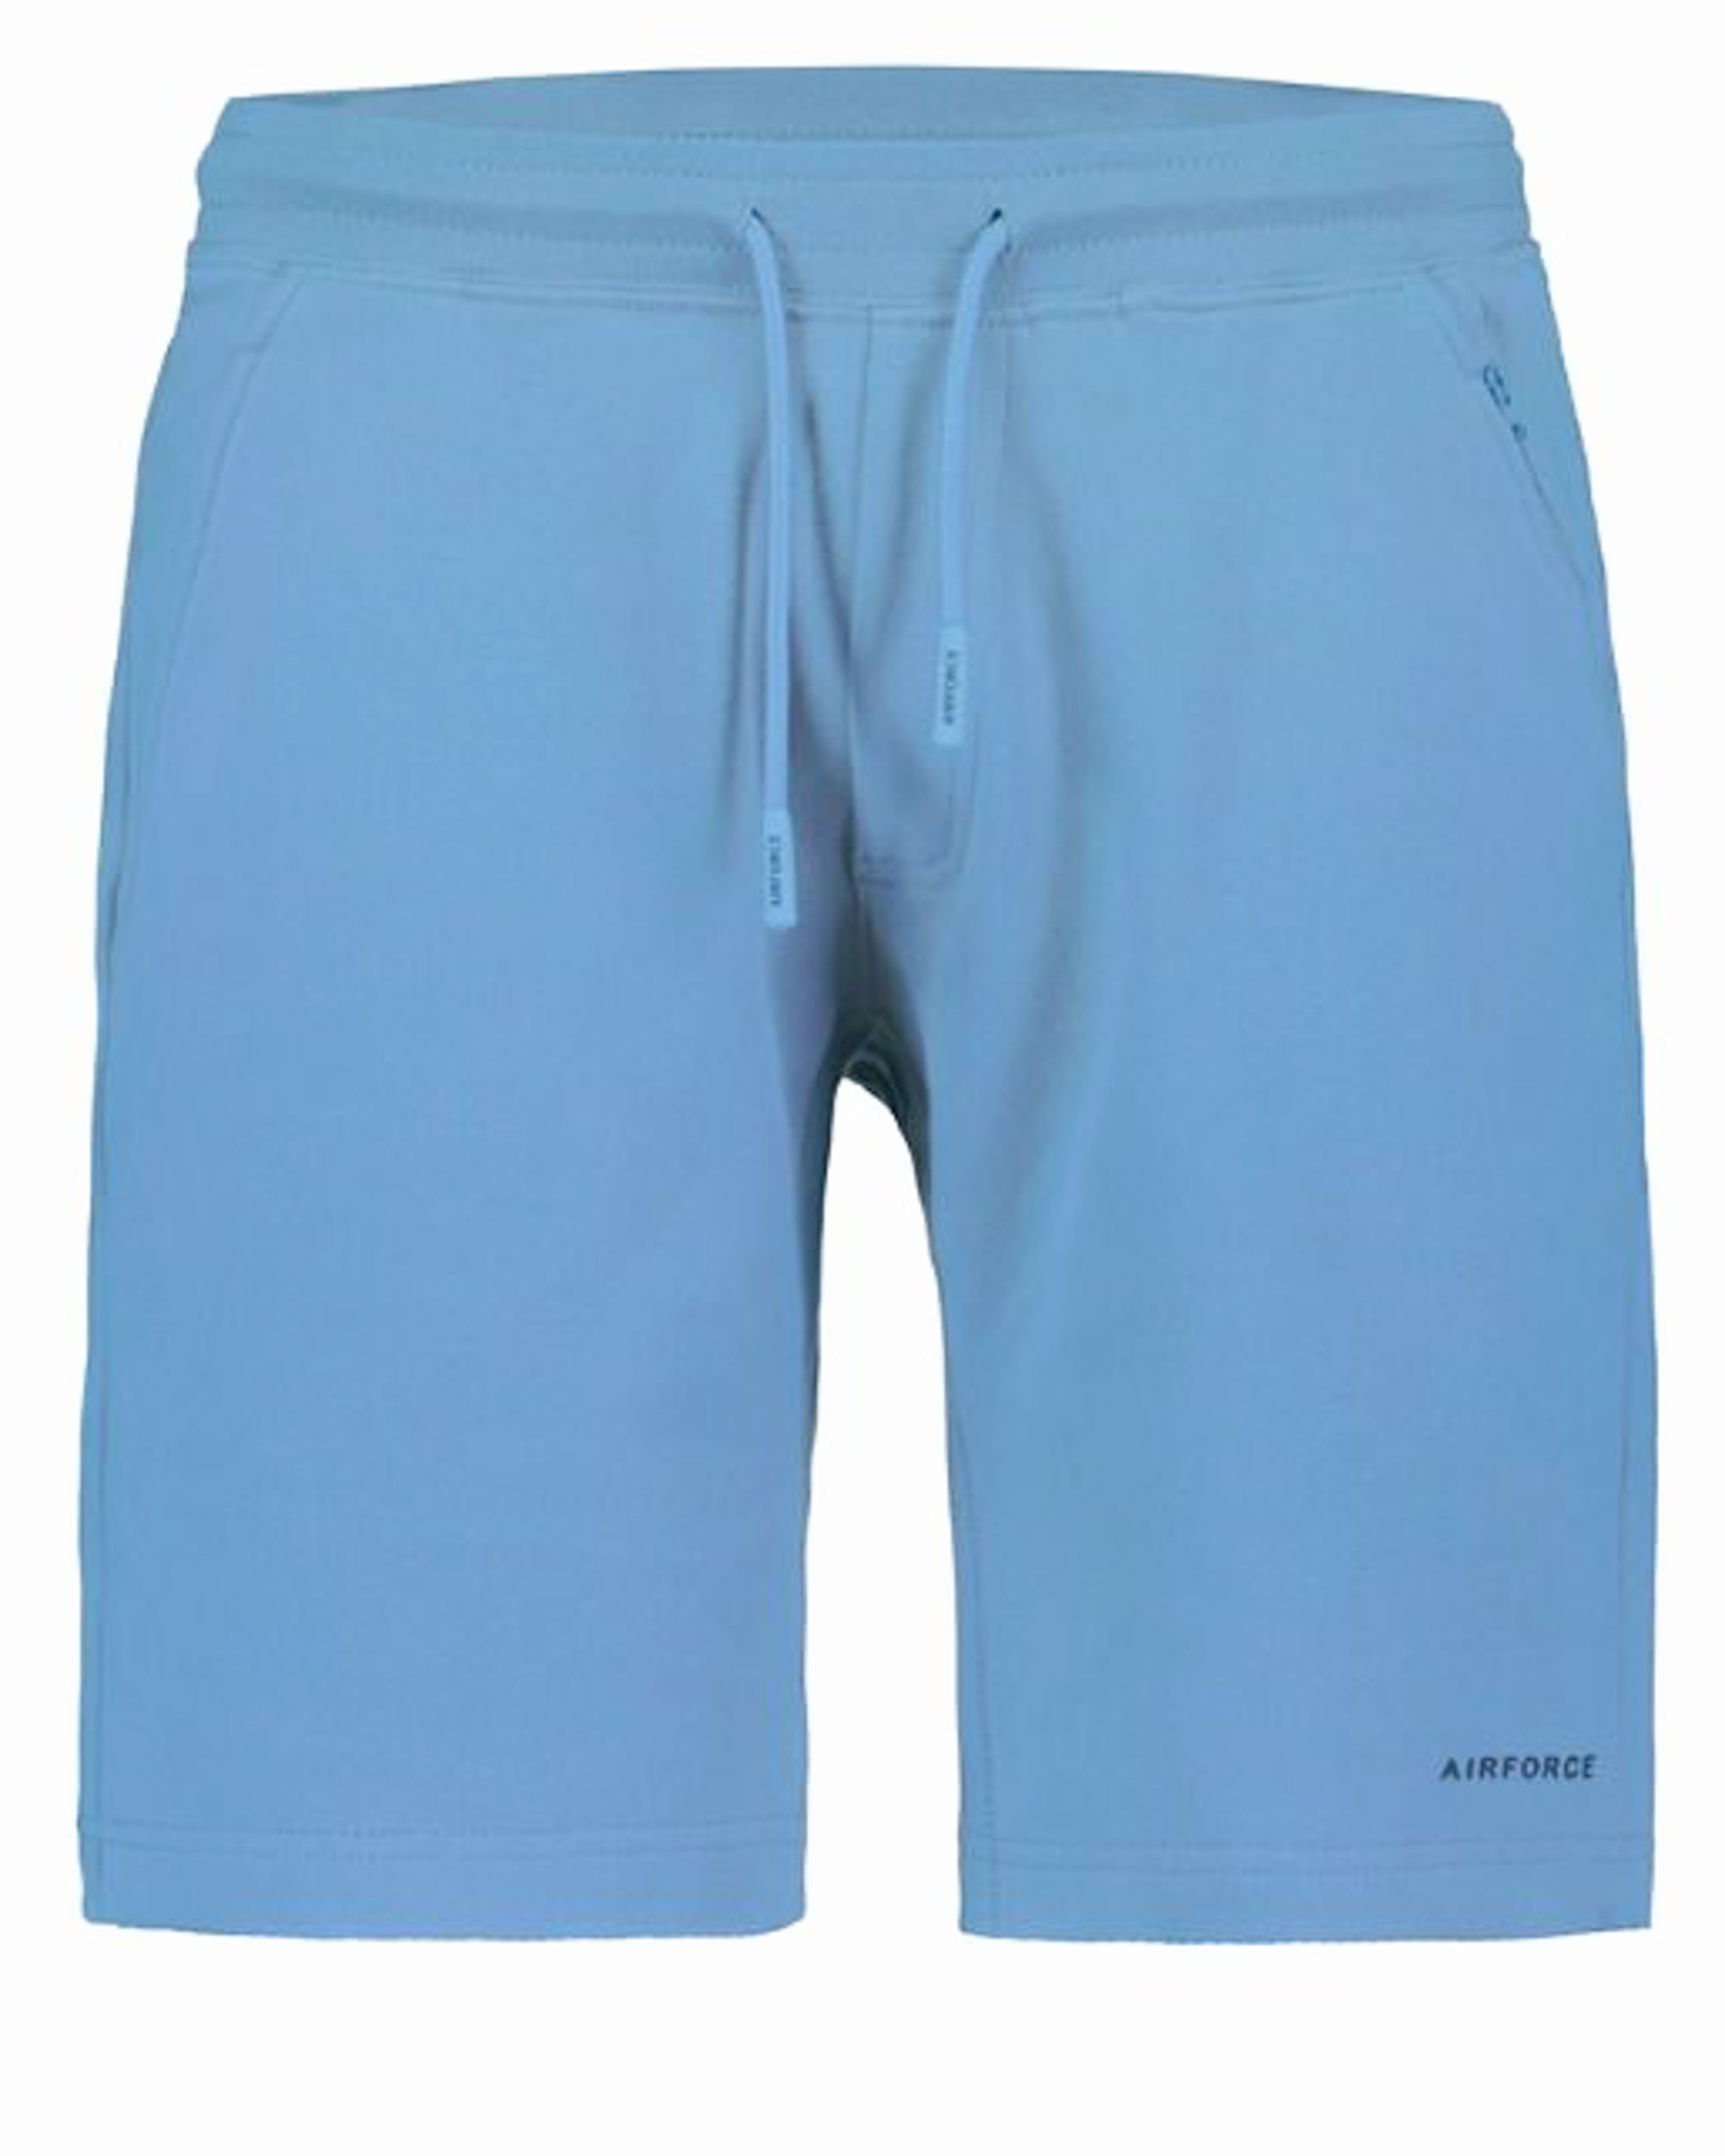 Airforce Short Donker blauw 092928-001-L